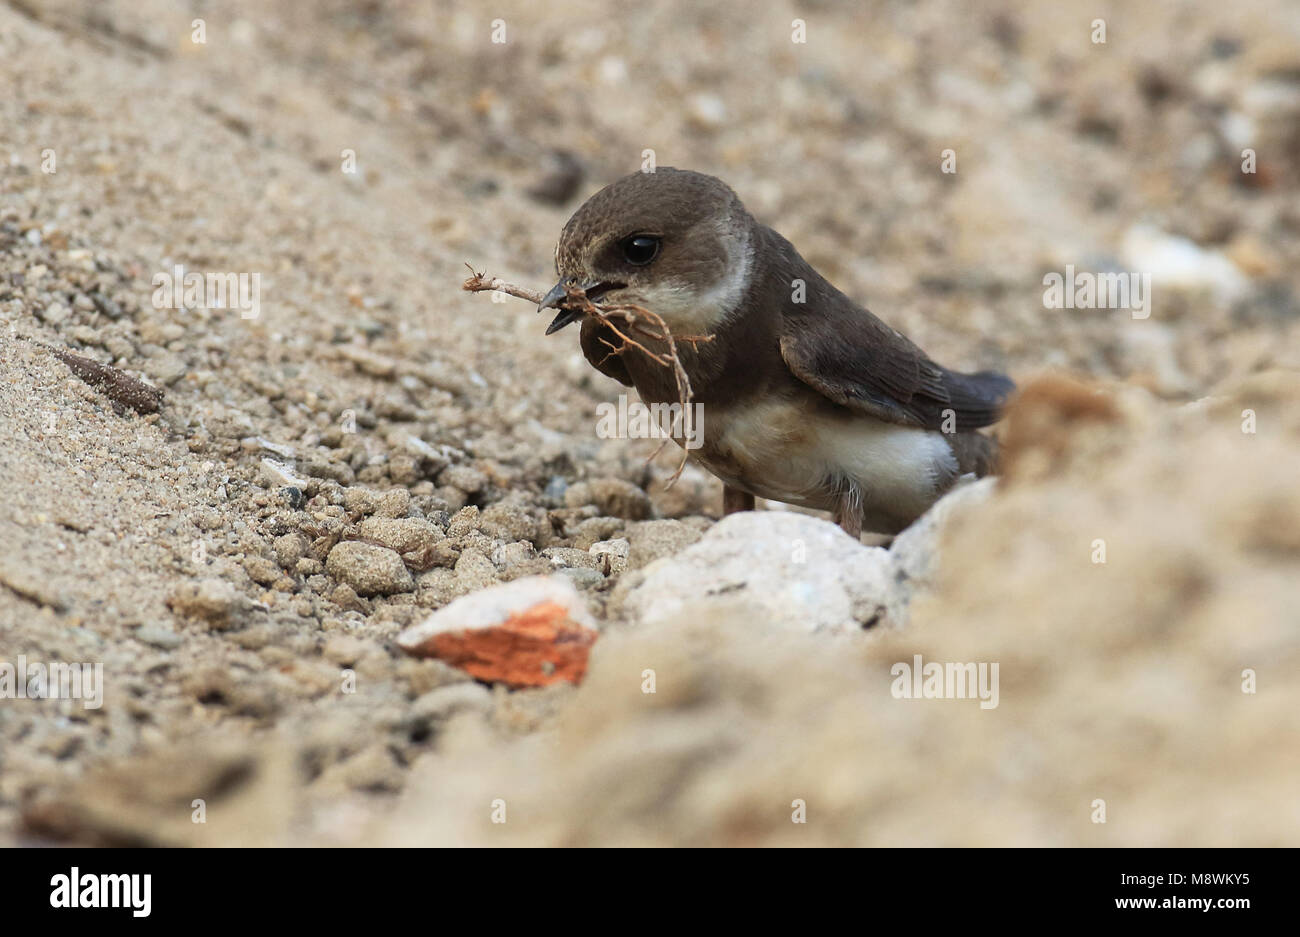 Oeverzwaluw met nestmateriaal; Sand martin with nesting material Stock Photo